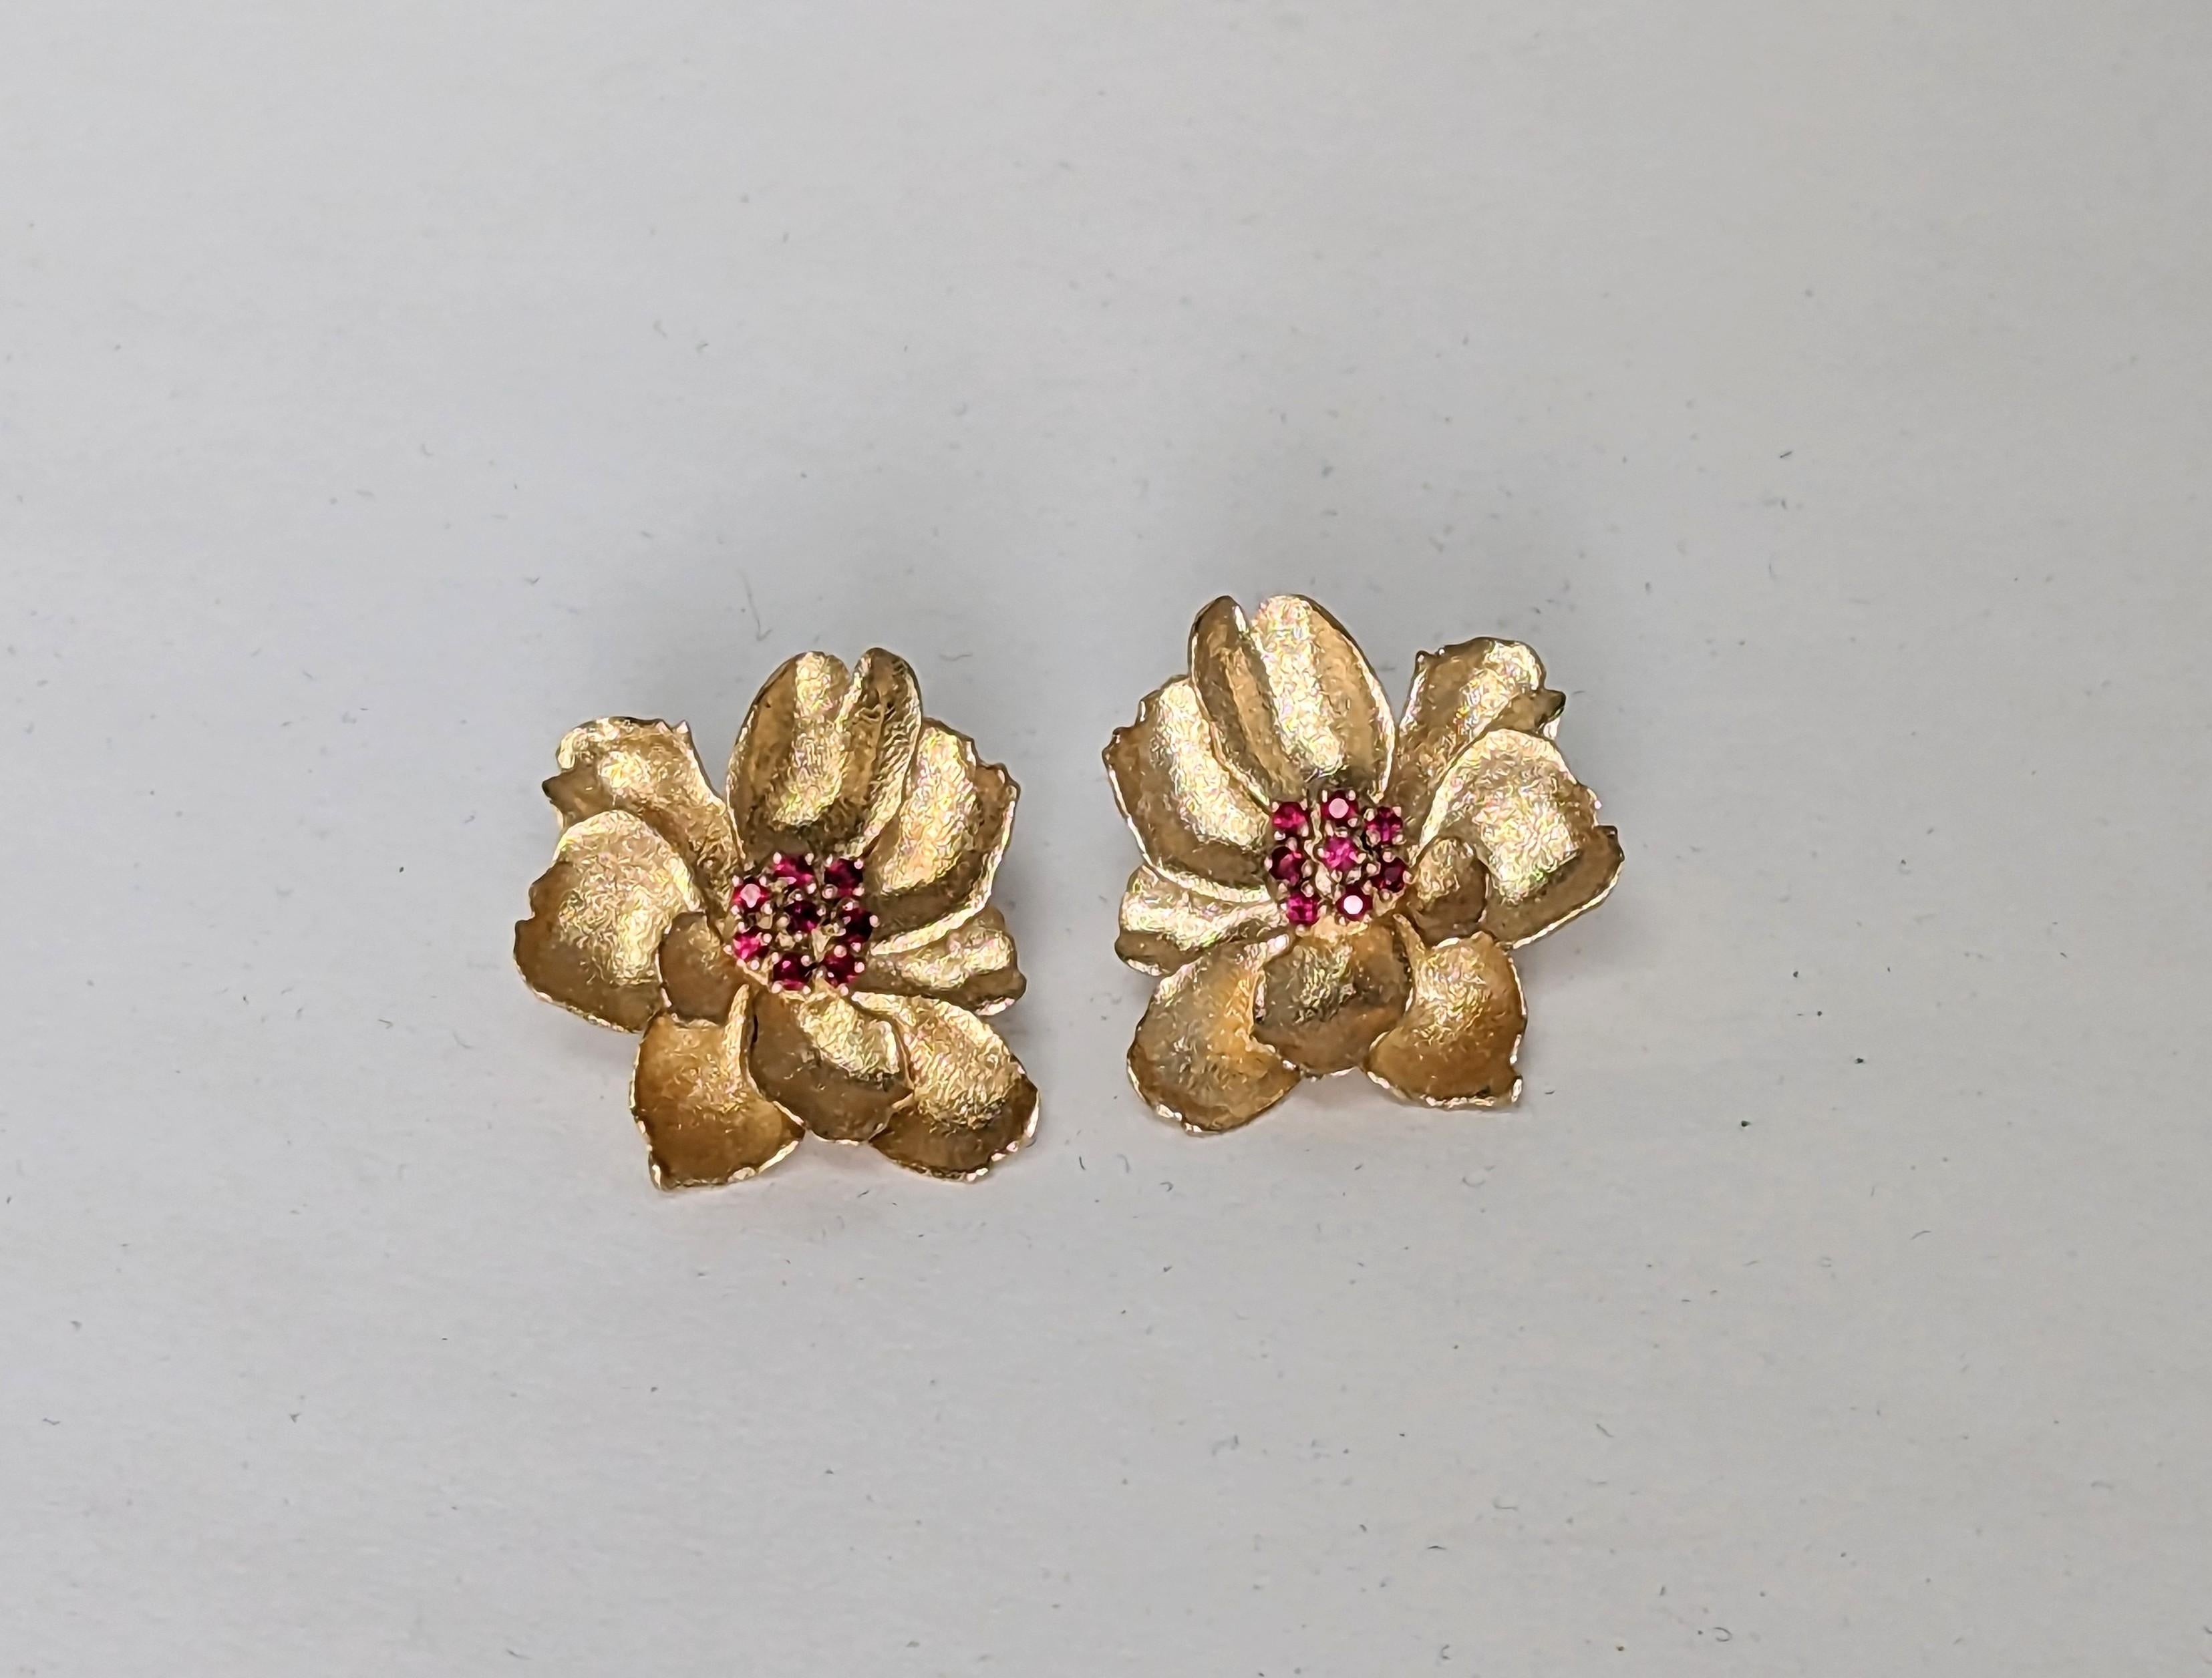 0 Karat White Gold Wild Flower Earrings with Rubies, Tiffany Designer Thomas Kurilla sculpted these exclusively for 1stdibs. Boredom causes us to challenge ourselves. Working from life especially during the covid  virus could push us two ways . To